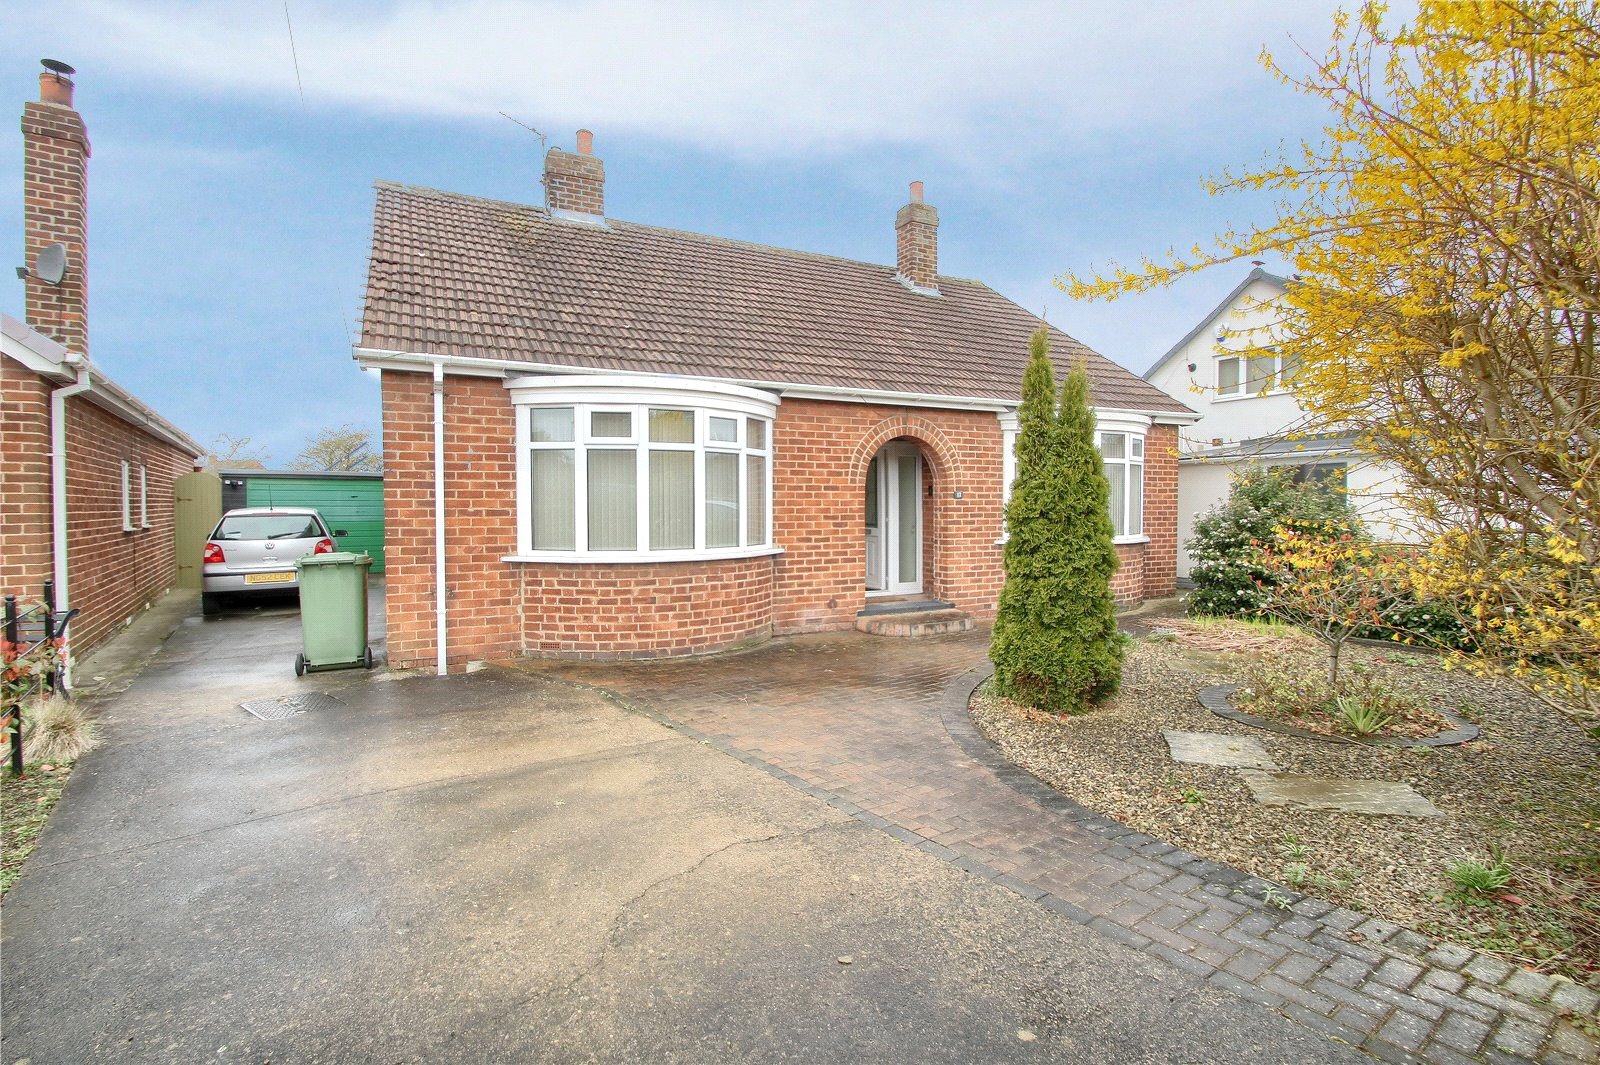 2 bed bungalow for sale in The Crescent, Eaglescliffe - Property Image 1